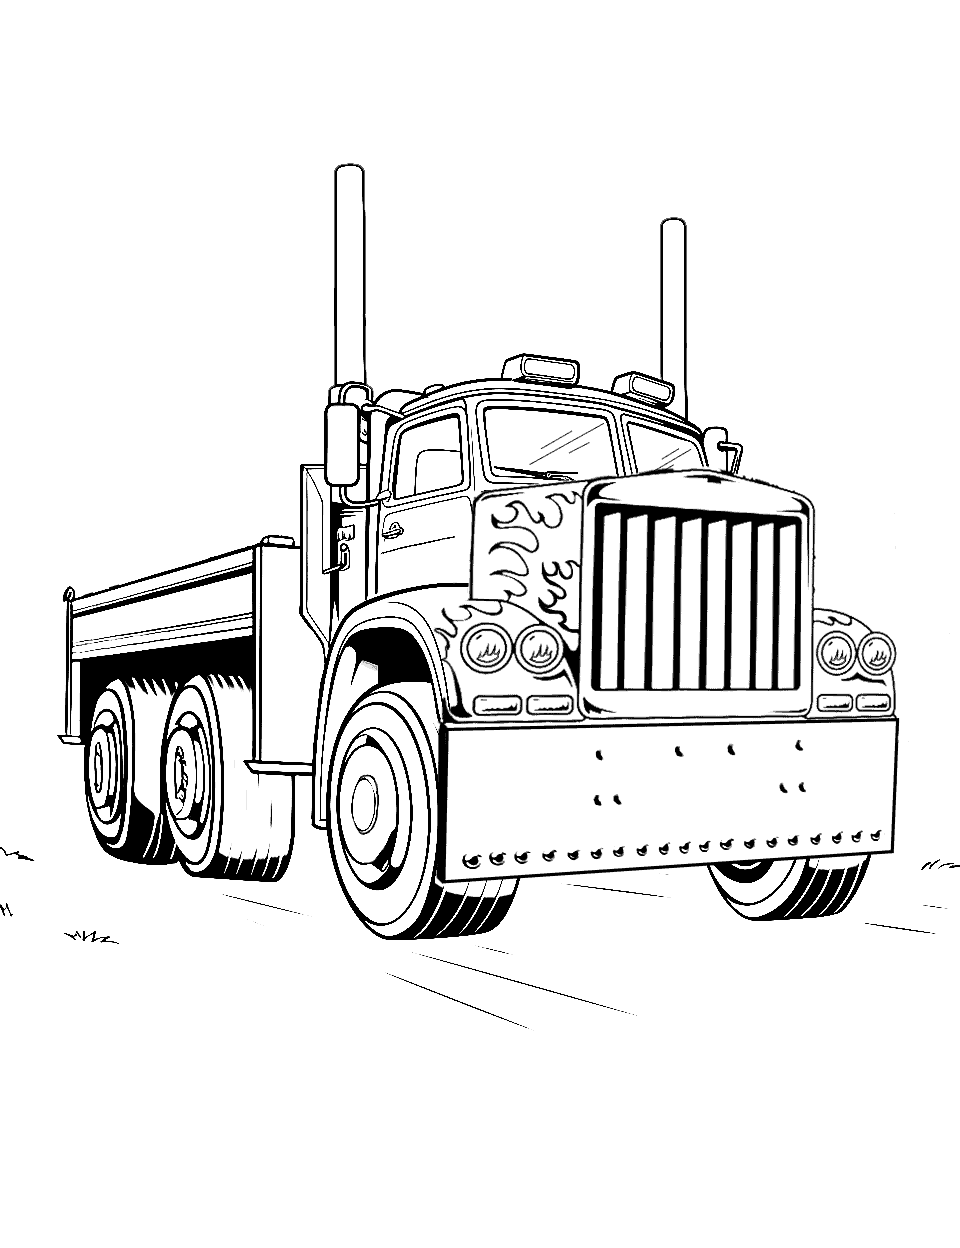 Optimus Prime on Guard Coloring Page - Optimus Prime in truck form, stationed boldly.